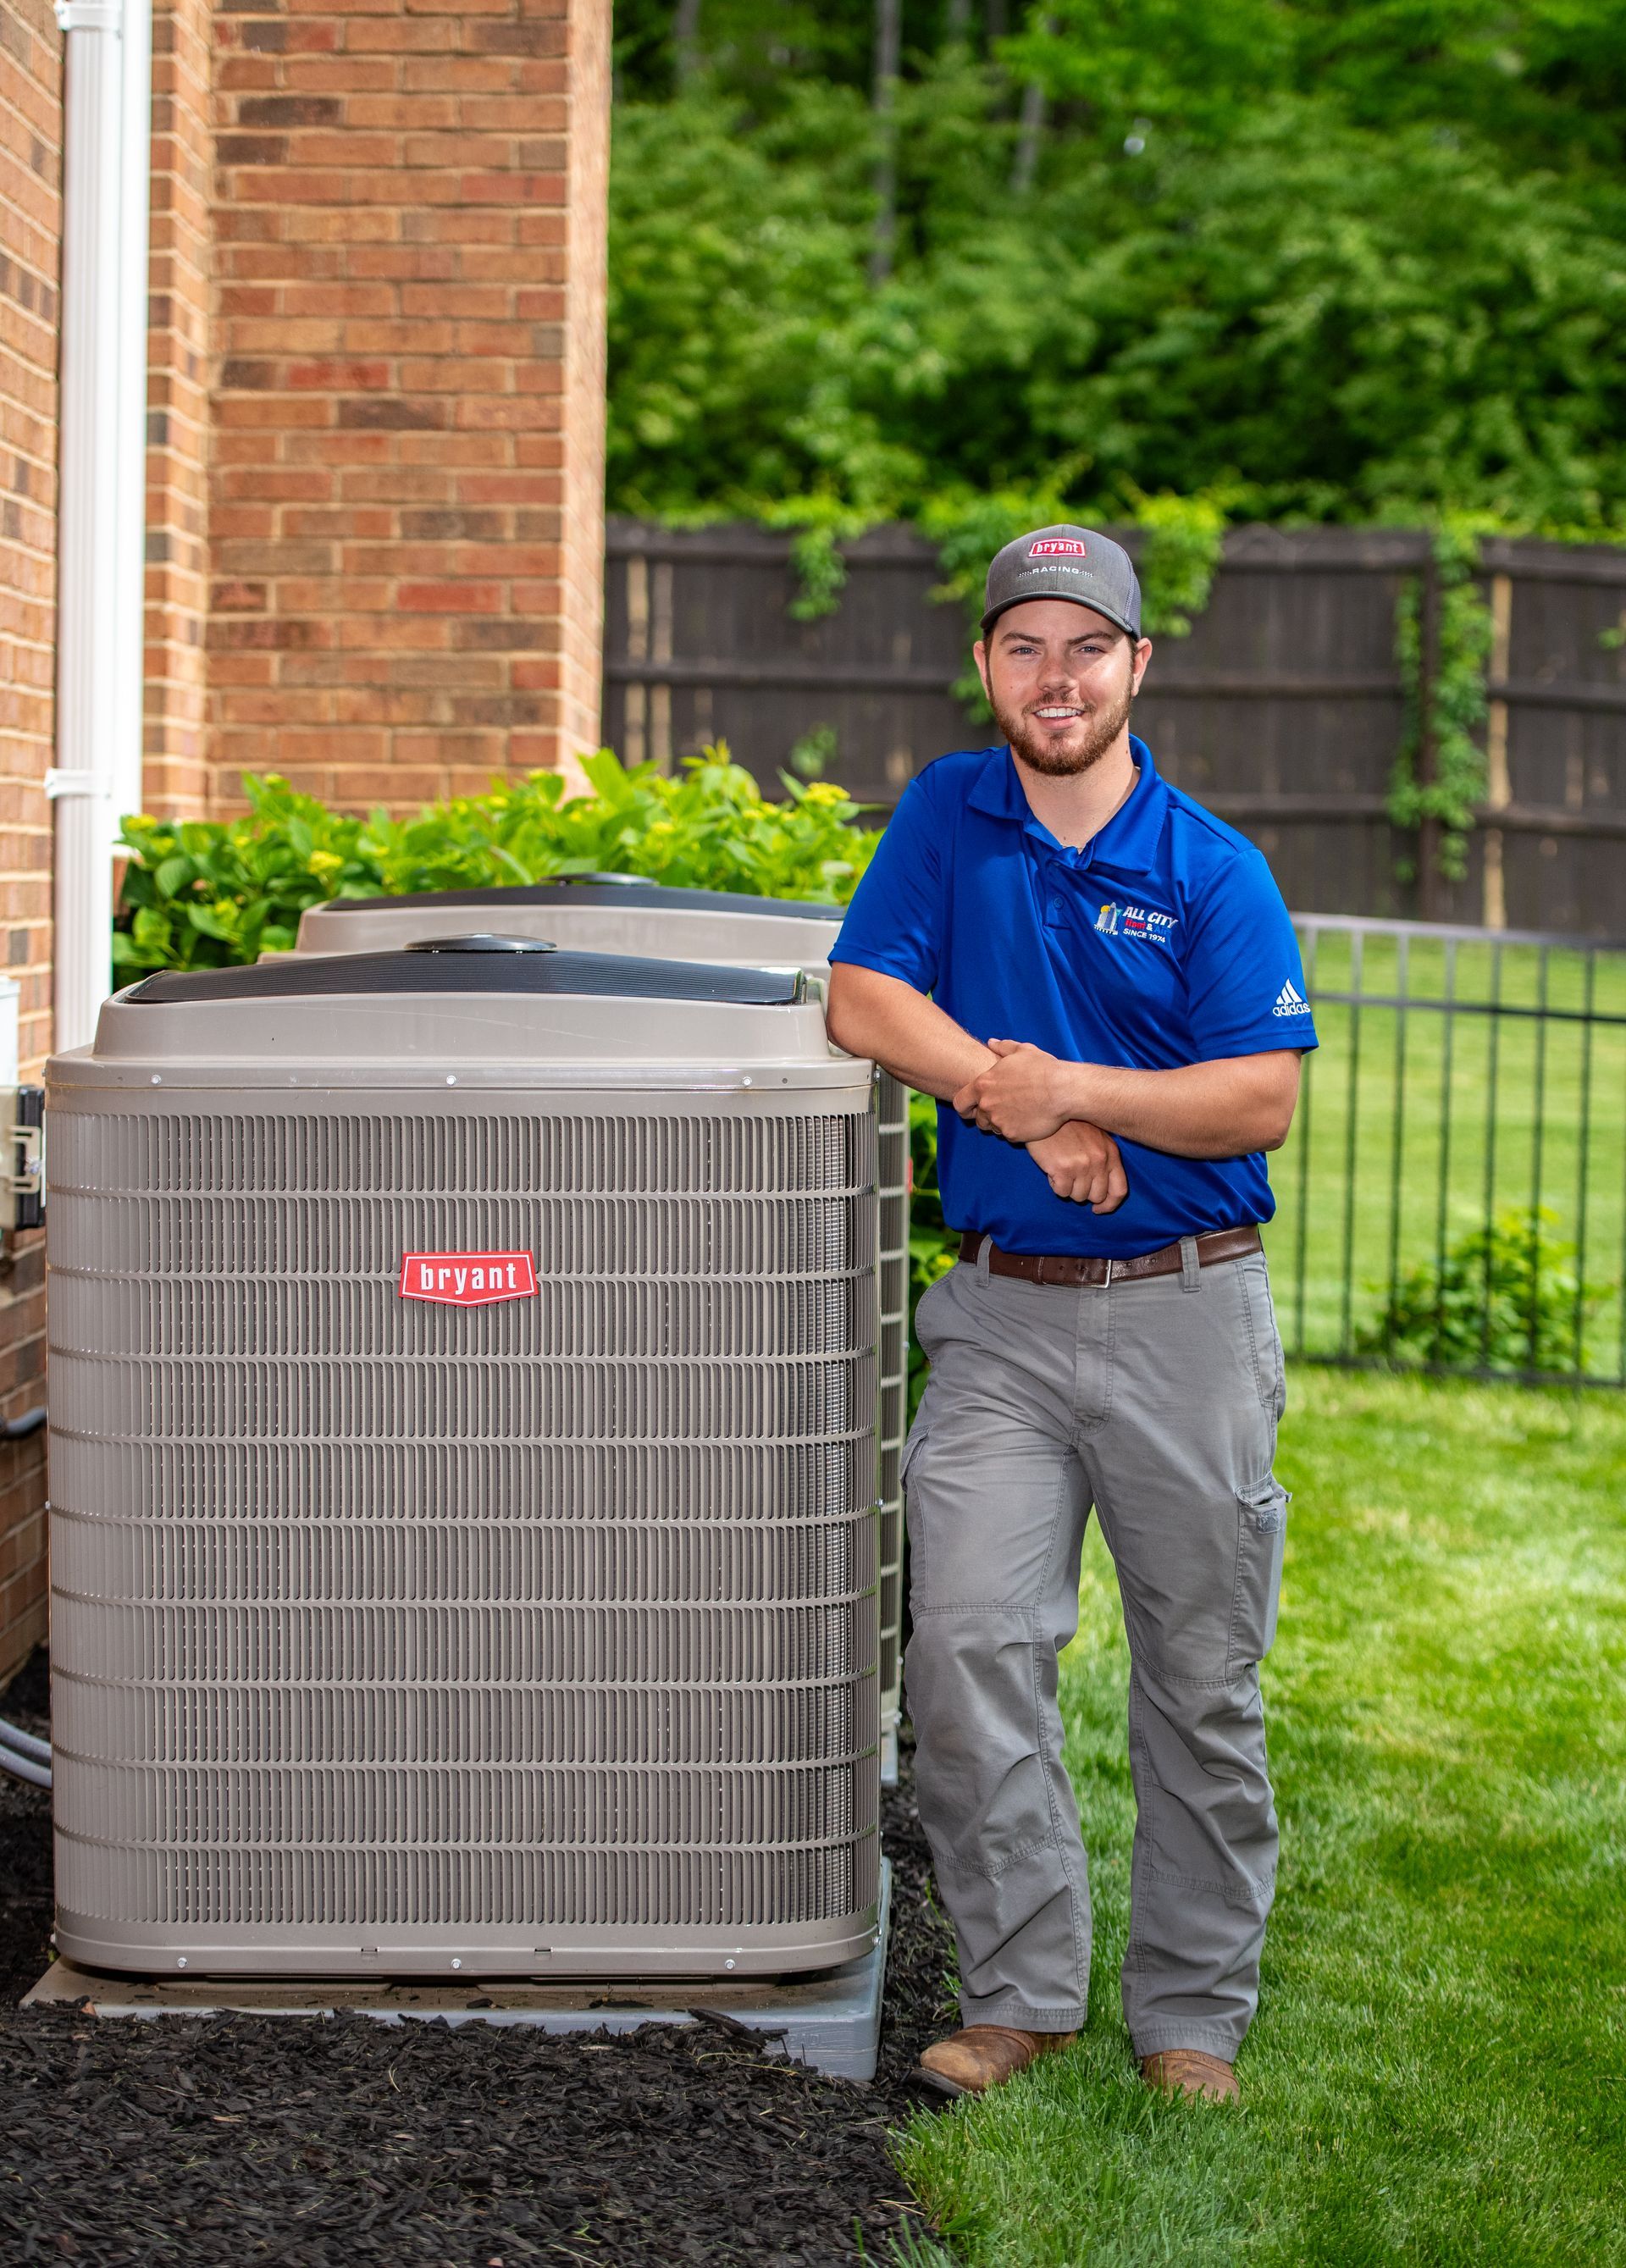 An All City Heat and Air technician in a blue shirt is standing next to an air conditioner.